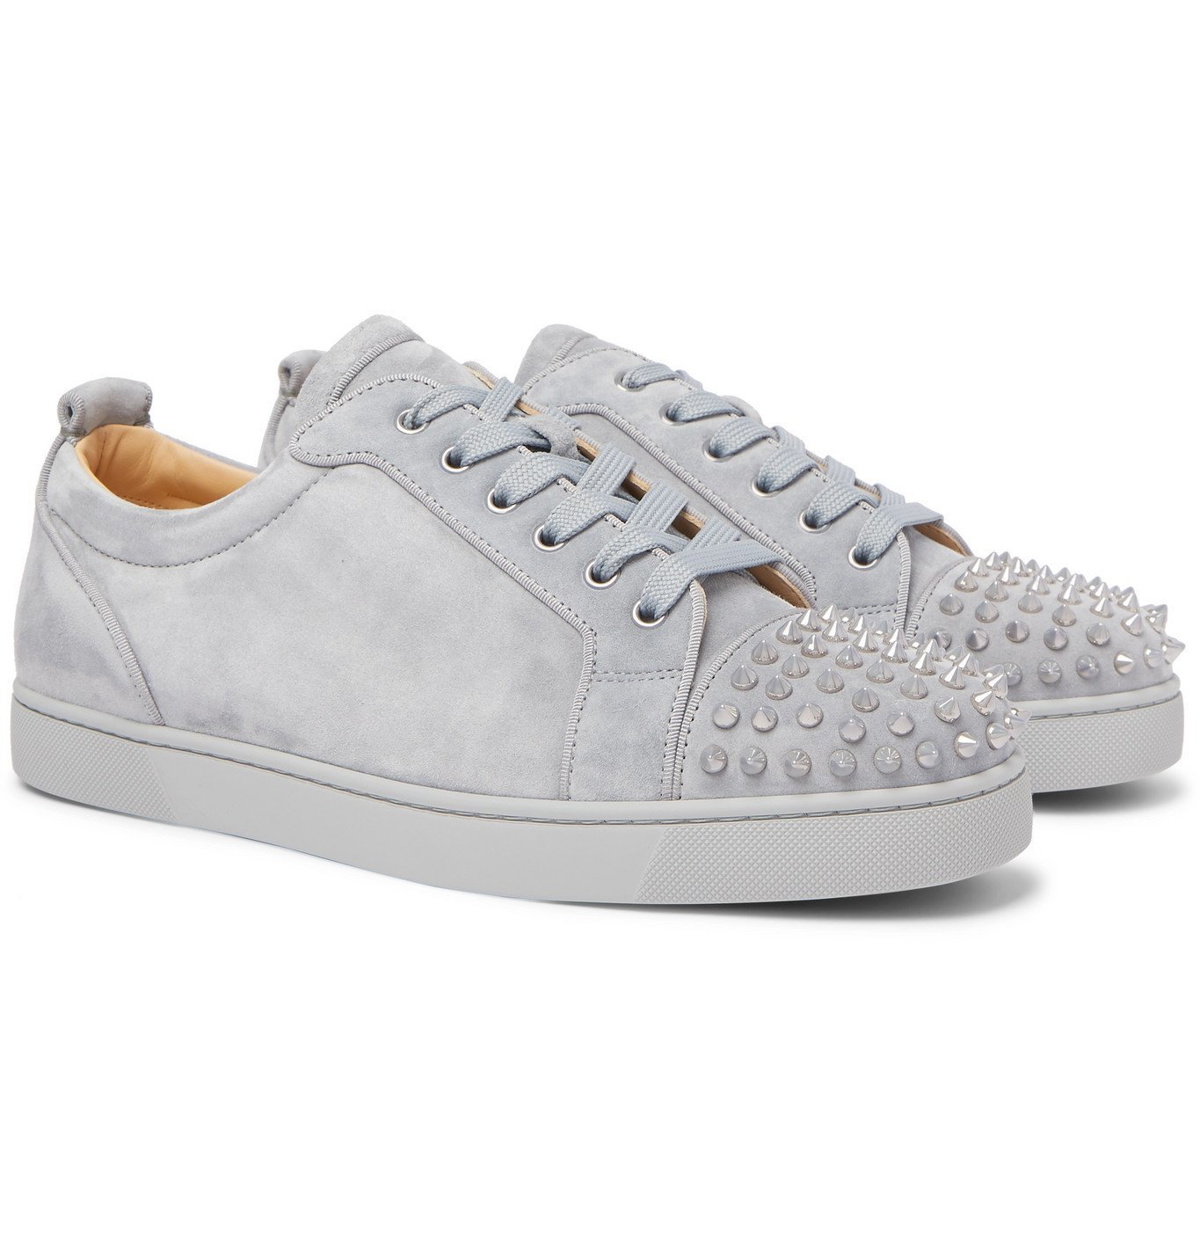 Christian Louboutin Men's Louis Junior Spikes Sneakers Suede Gray